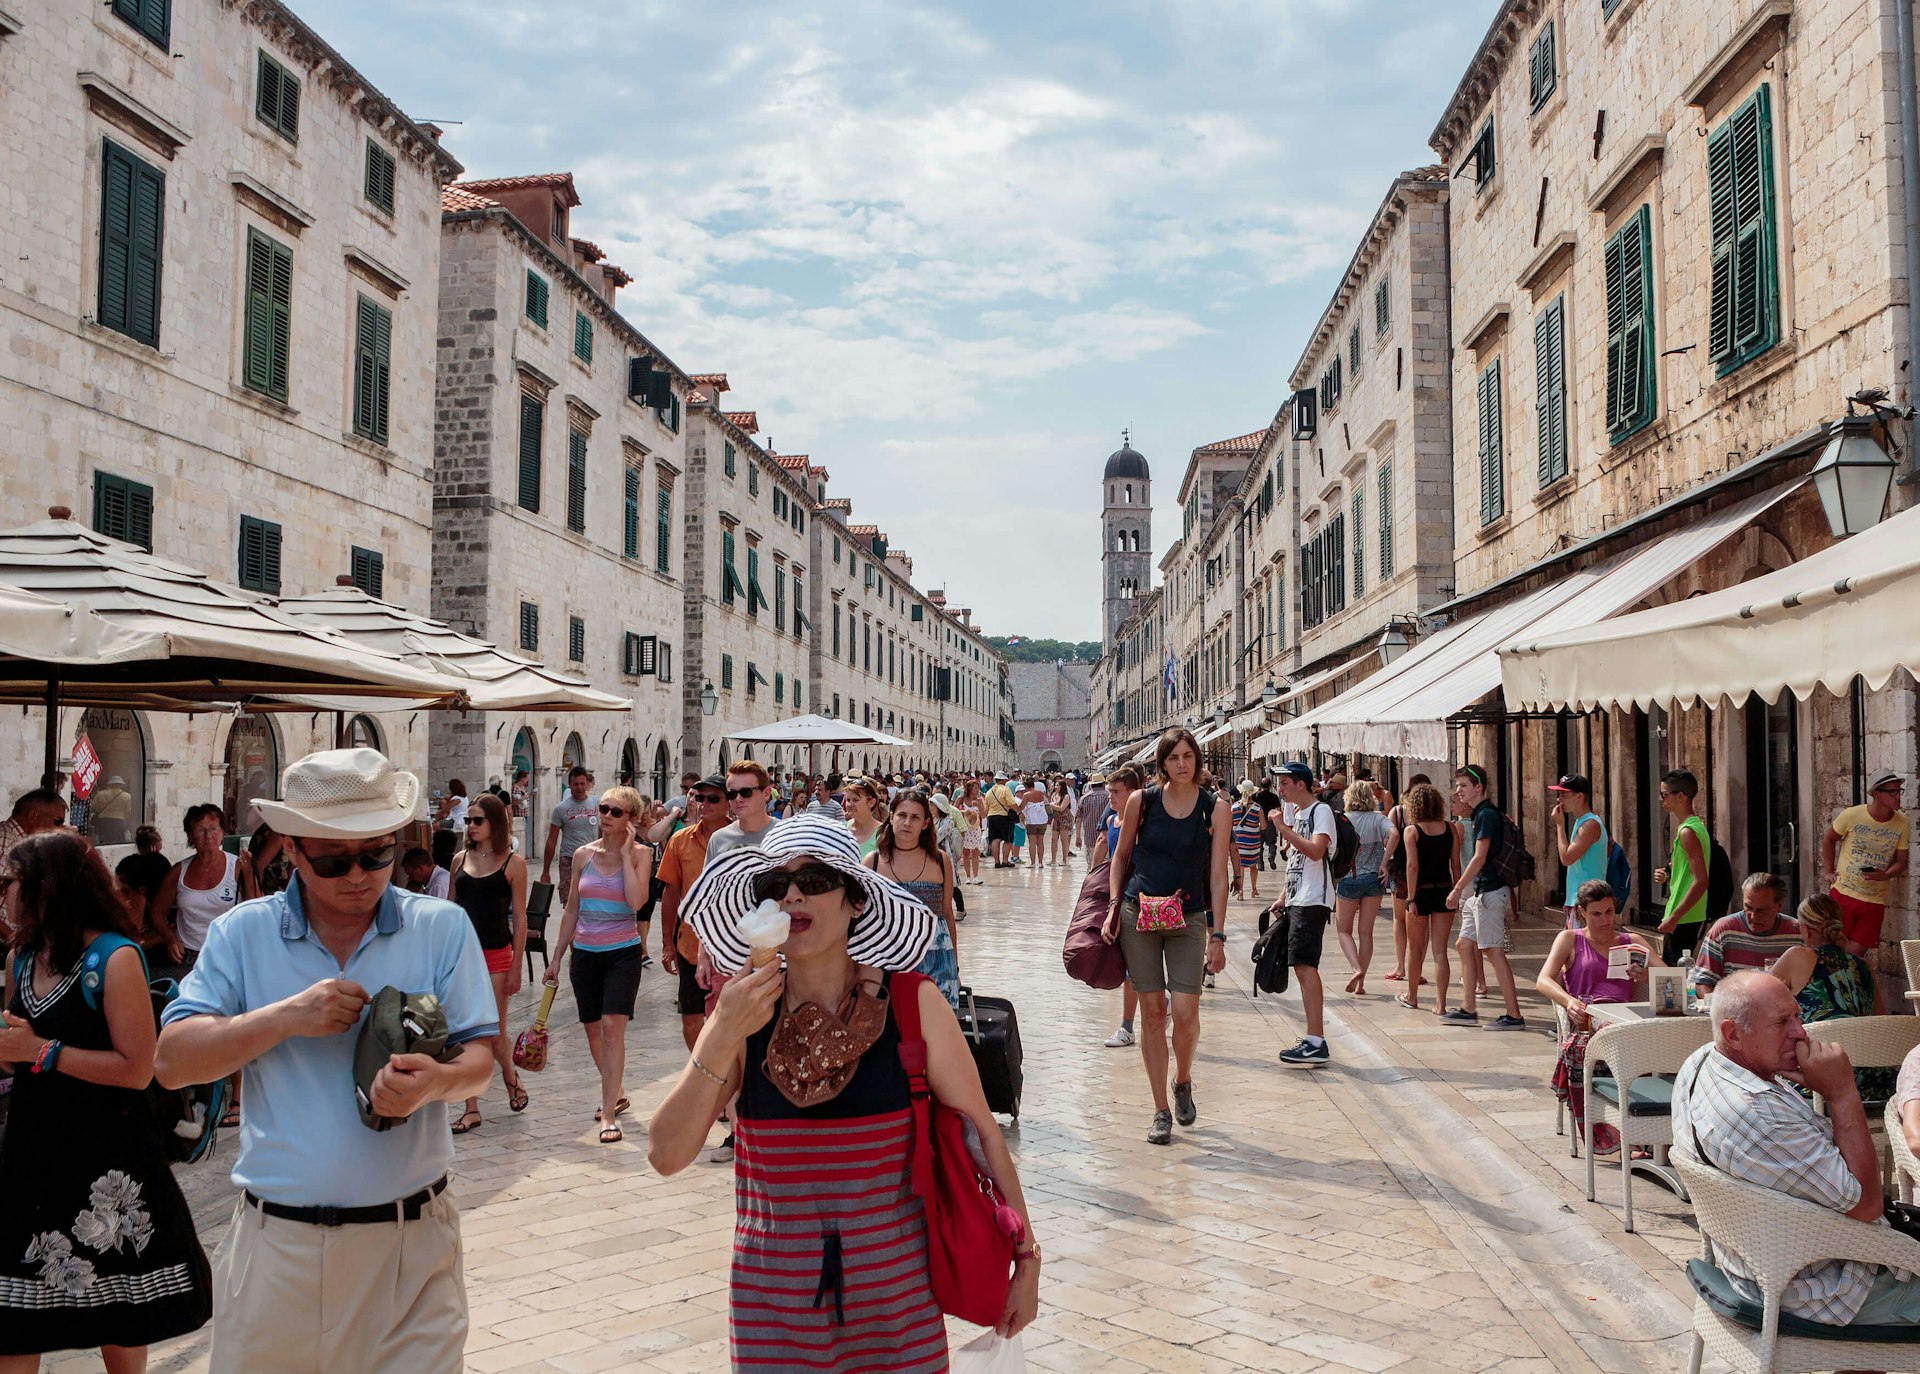 Summer scene of the main street (Stradun or Placa), with locals, tourists and a woman eating an ice cream cone